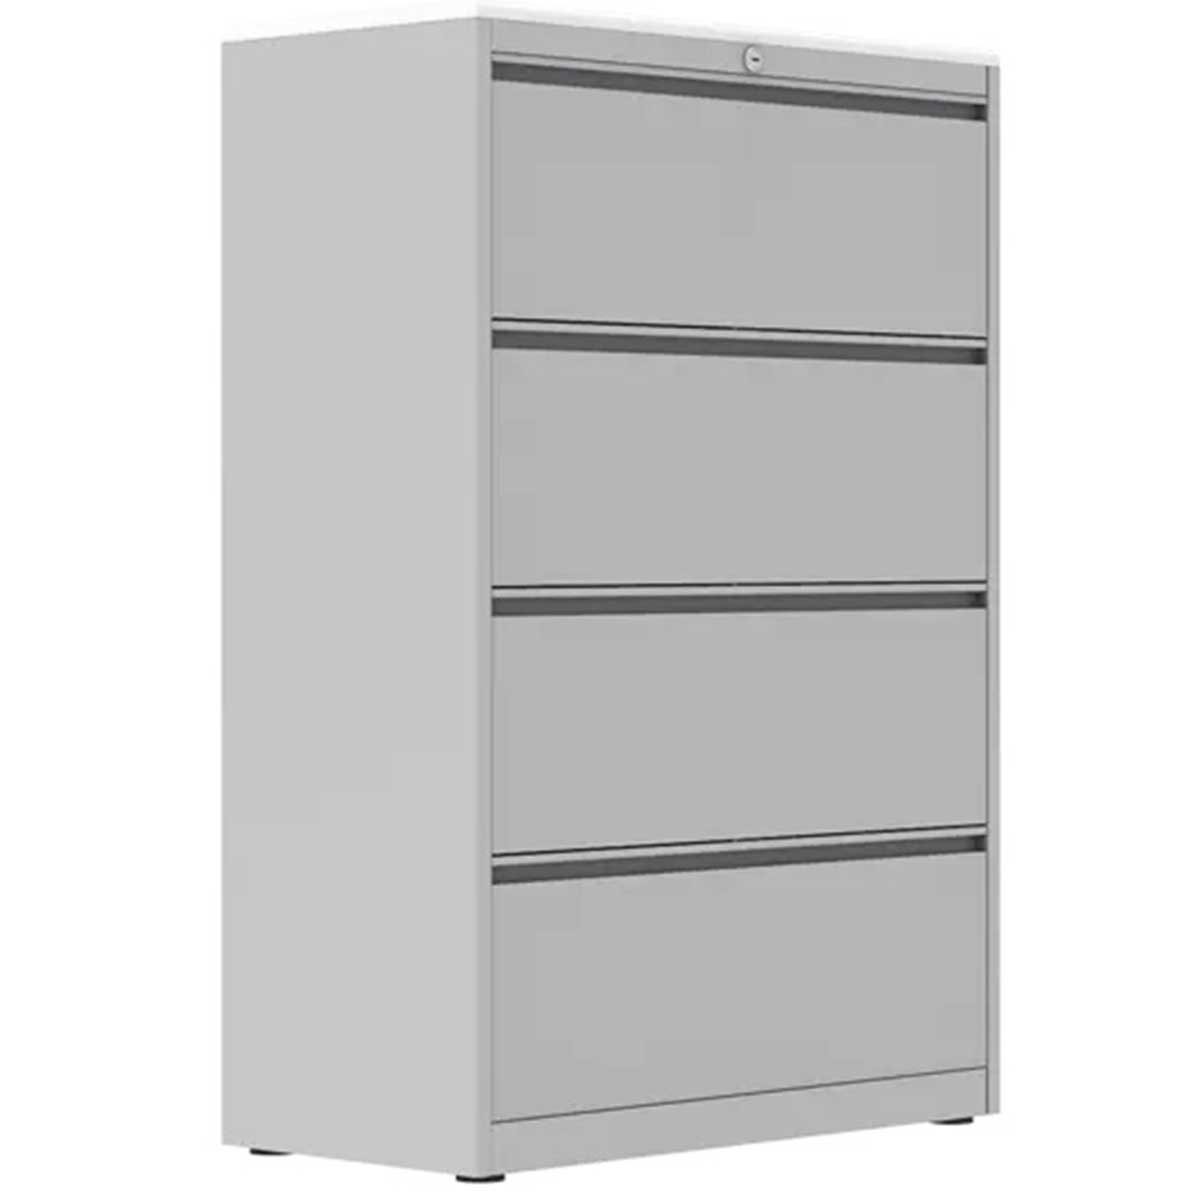 Fire Resistant File Cabinet Manufacturers, Suppliers in Zone P Ii